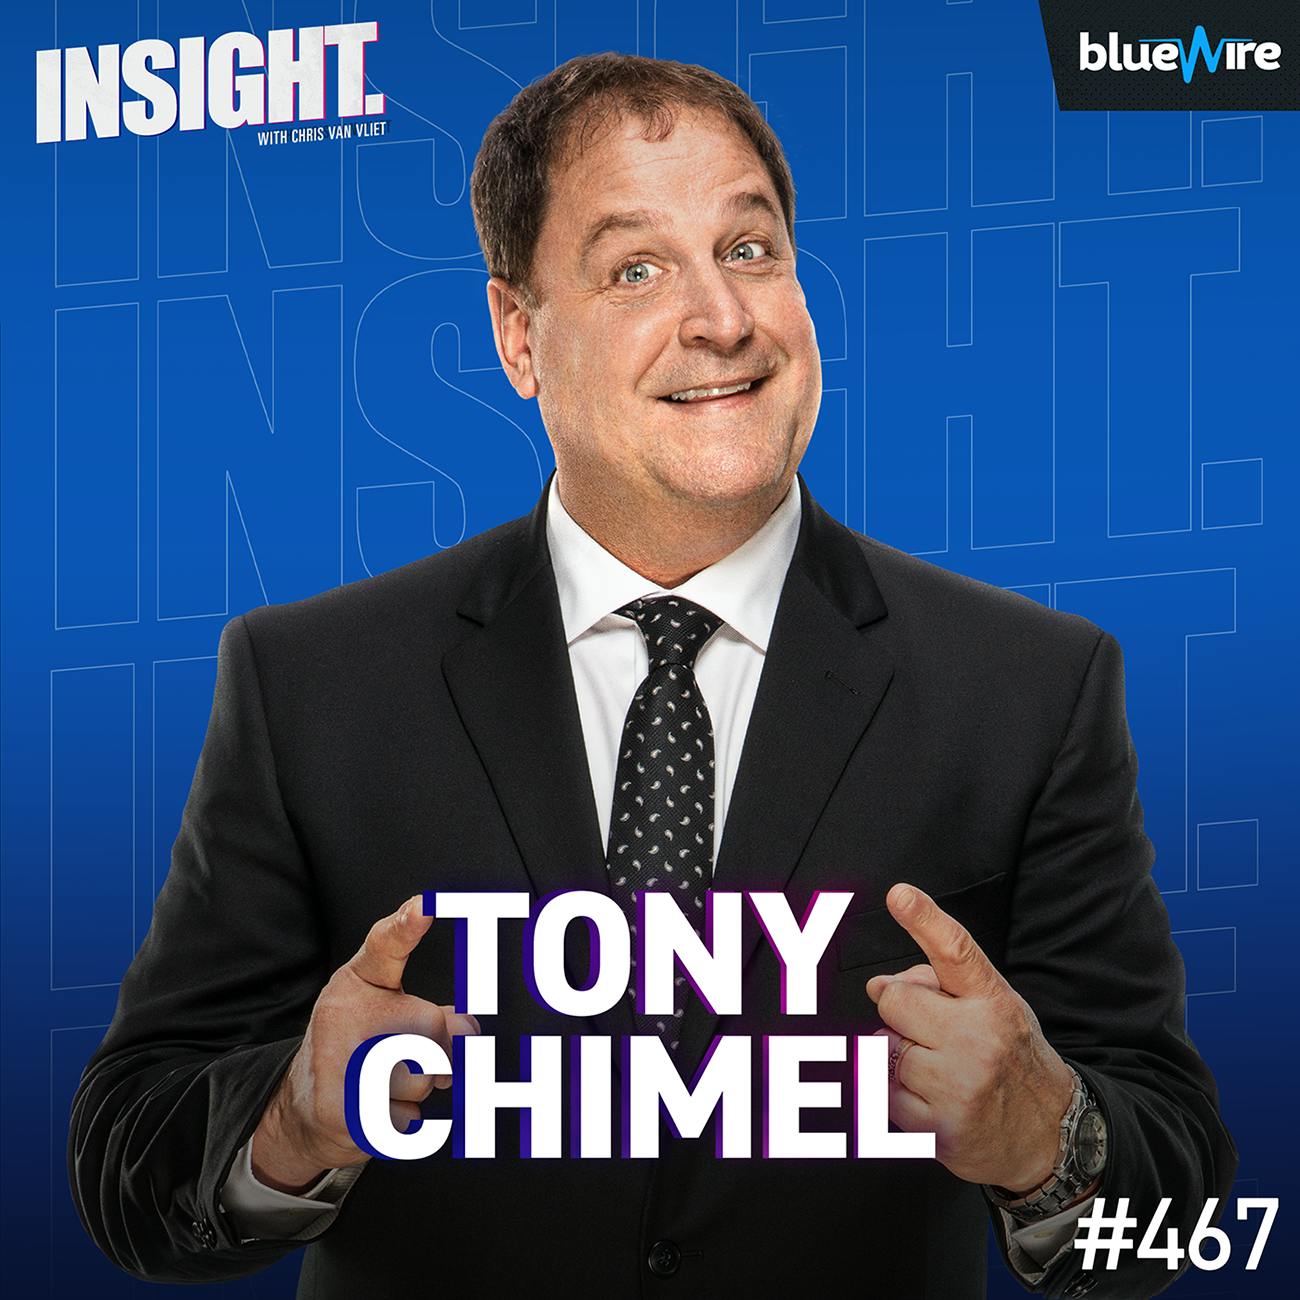 Tony Chimel - WWE's Legendary Ring Announcer On His Intro For Edge & 38 Years In WWE (Interview From February 2022)